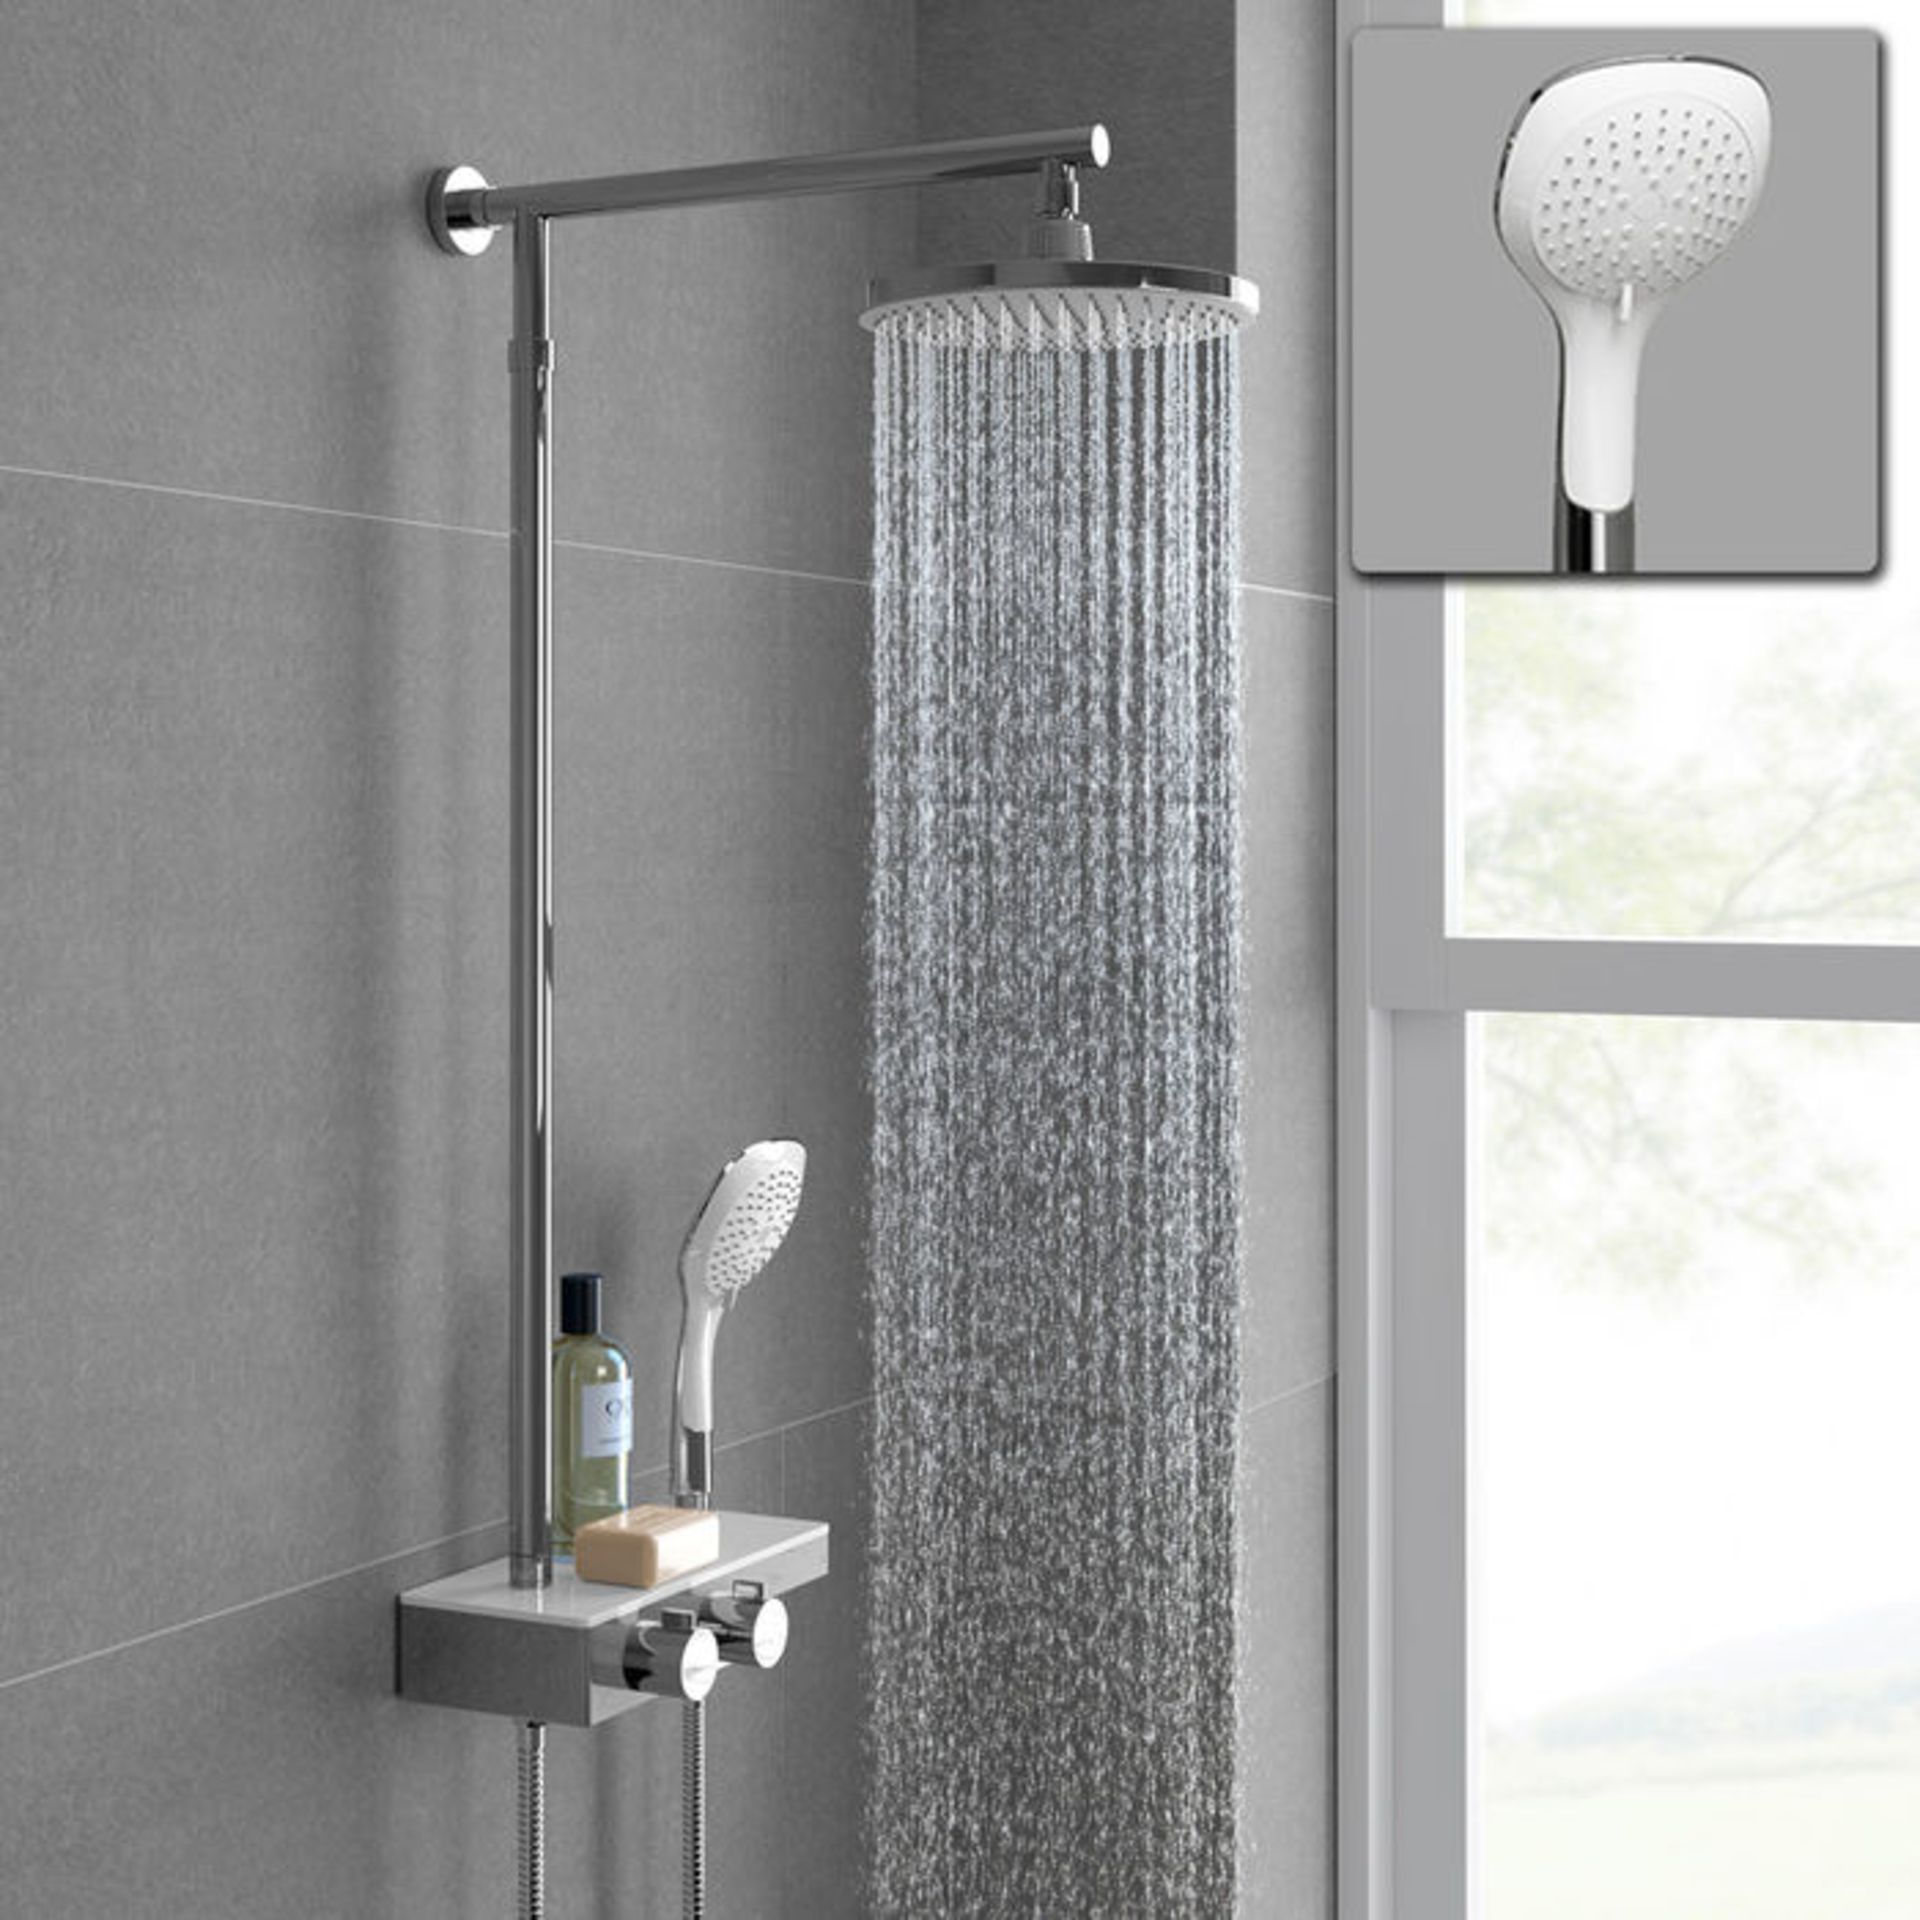 (KL181) Round Exposed Thermostatic Mixer Shower Kit Medium Head & Shelf. Cool to touch shower for - Image 4 of 4